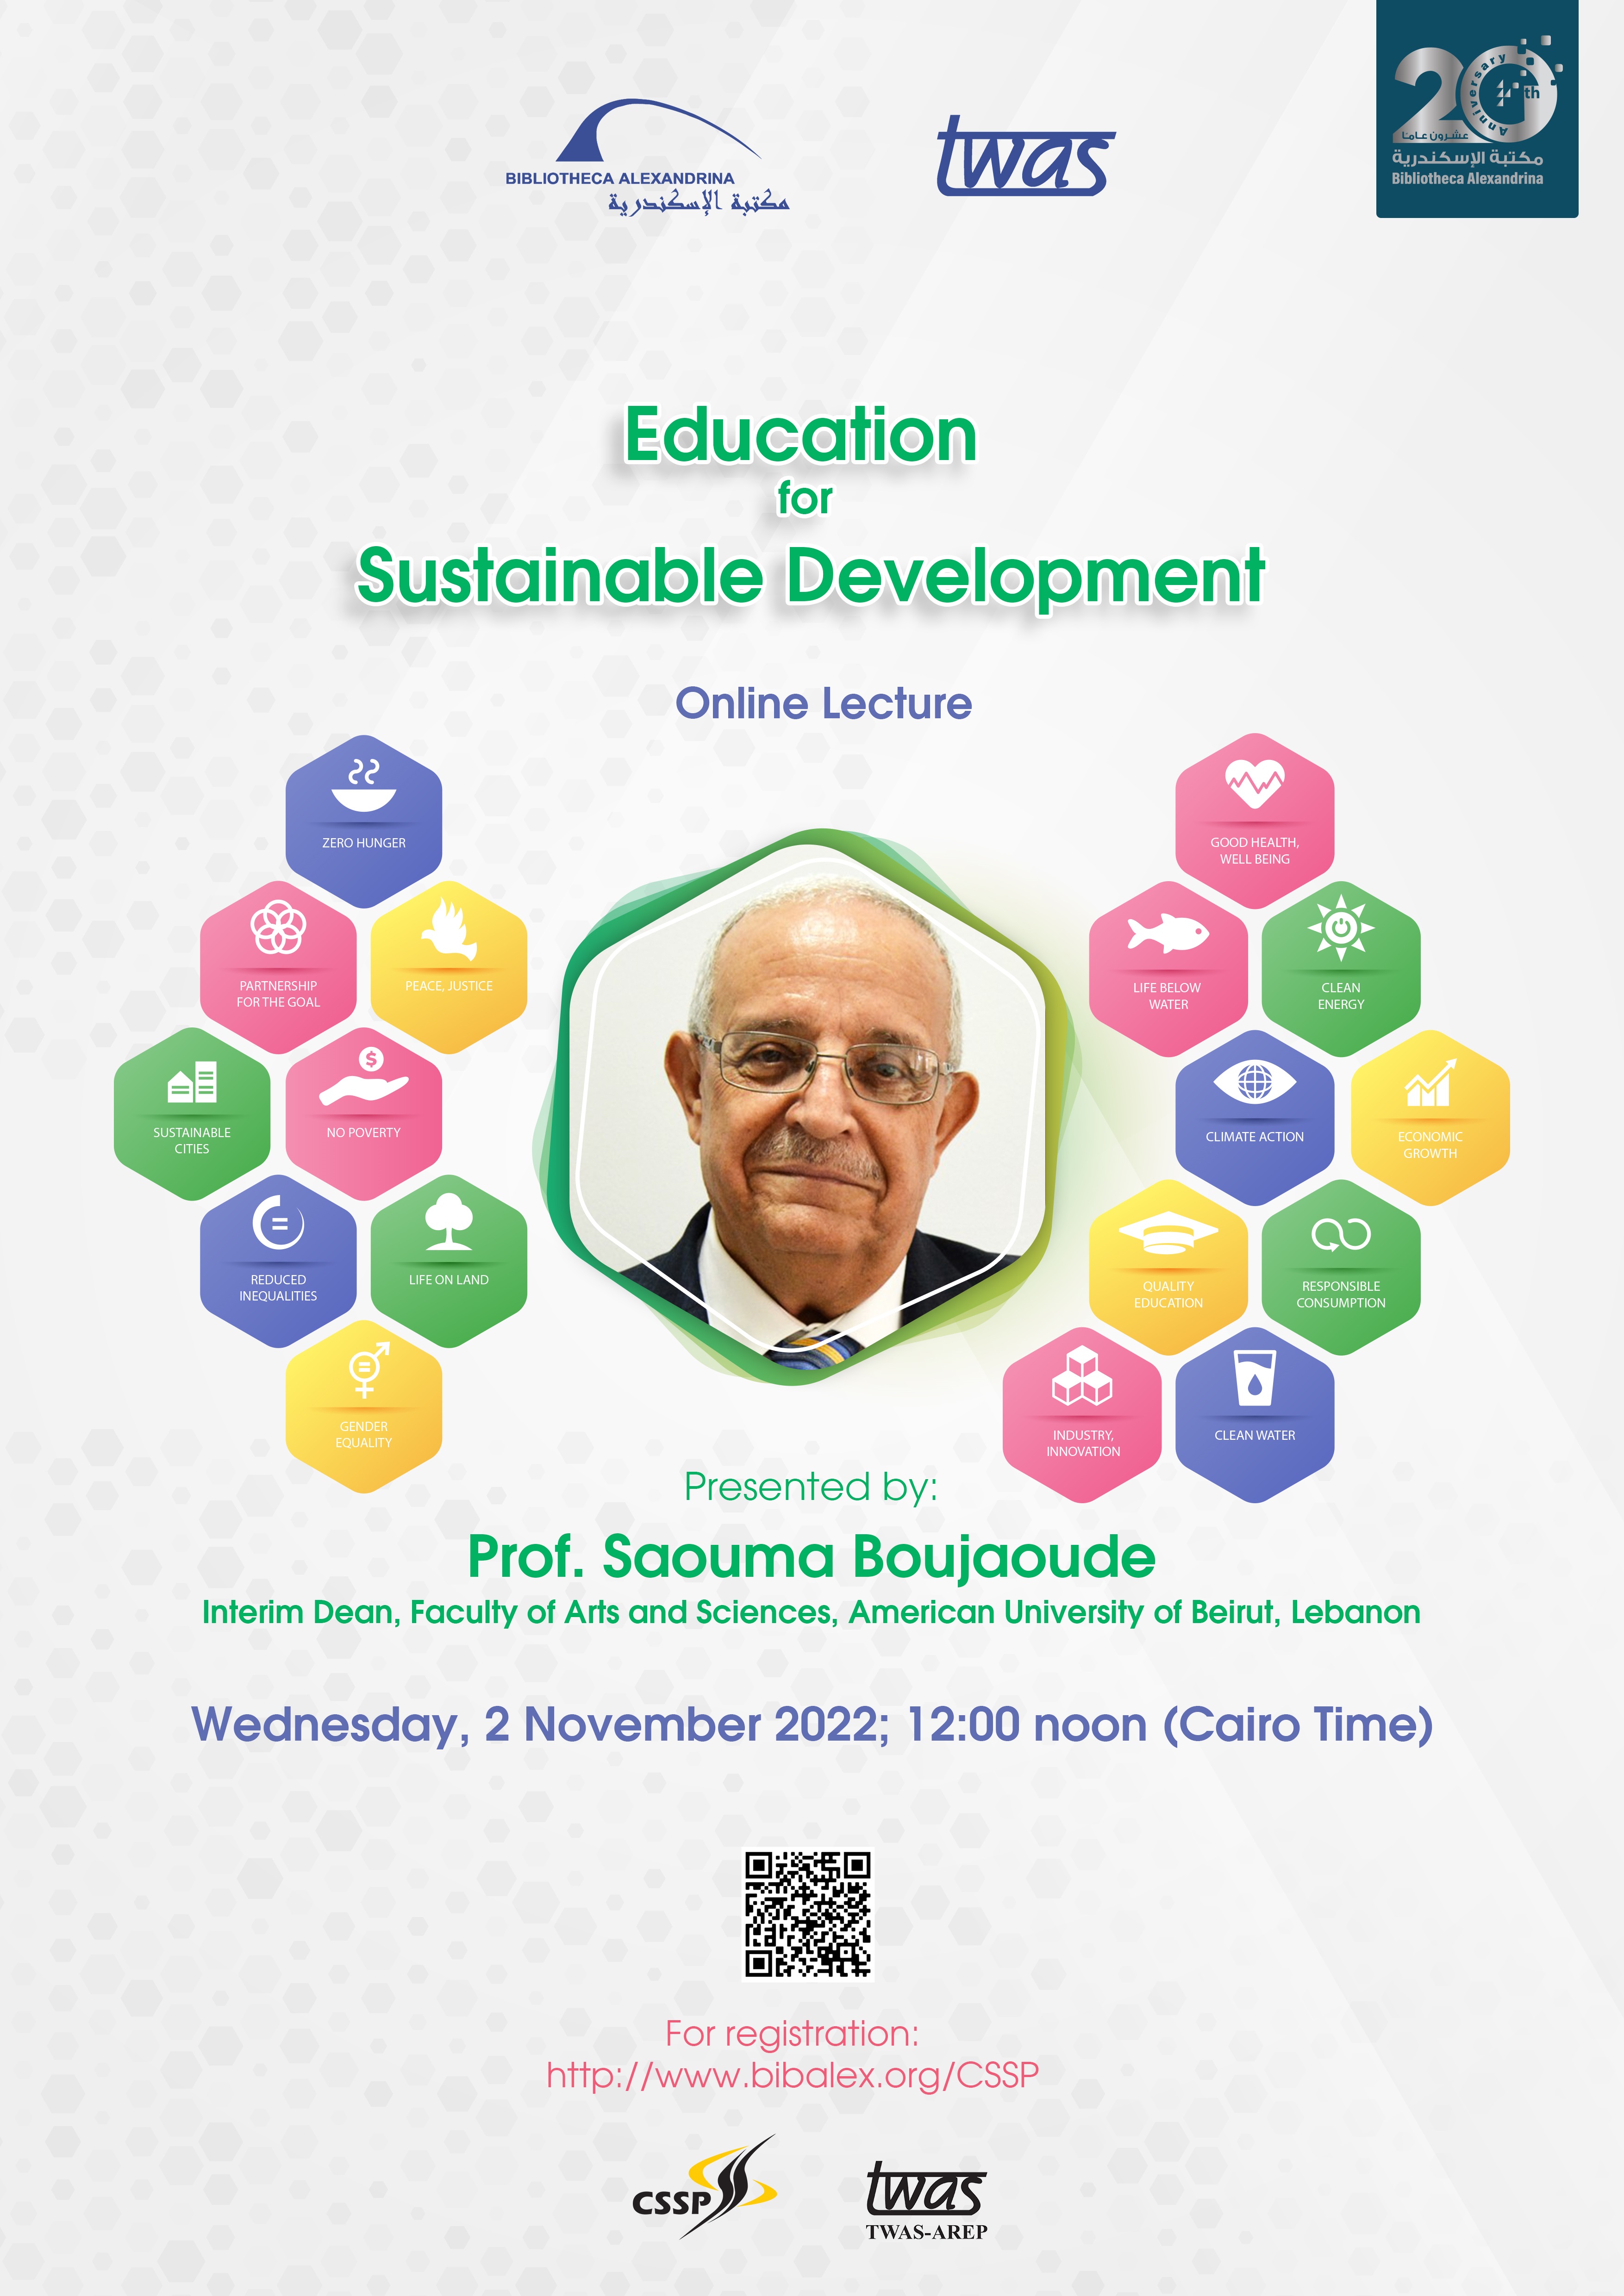 Online lecture titled "Education for Sustainable Development" 